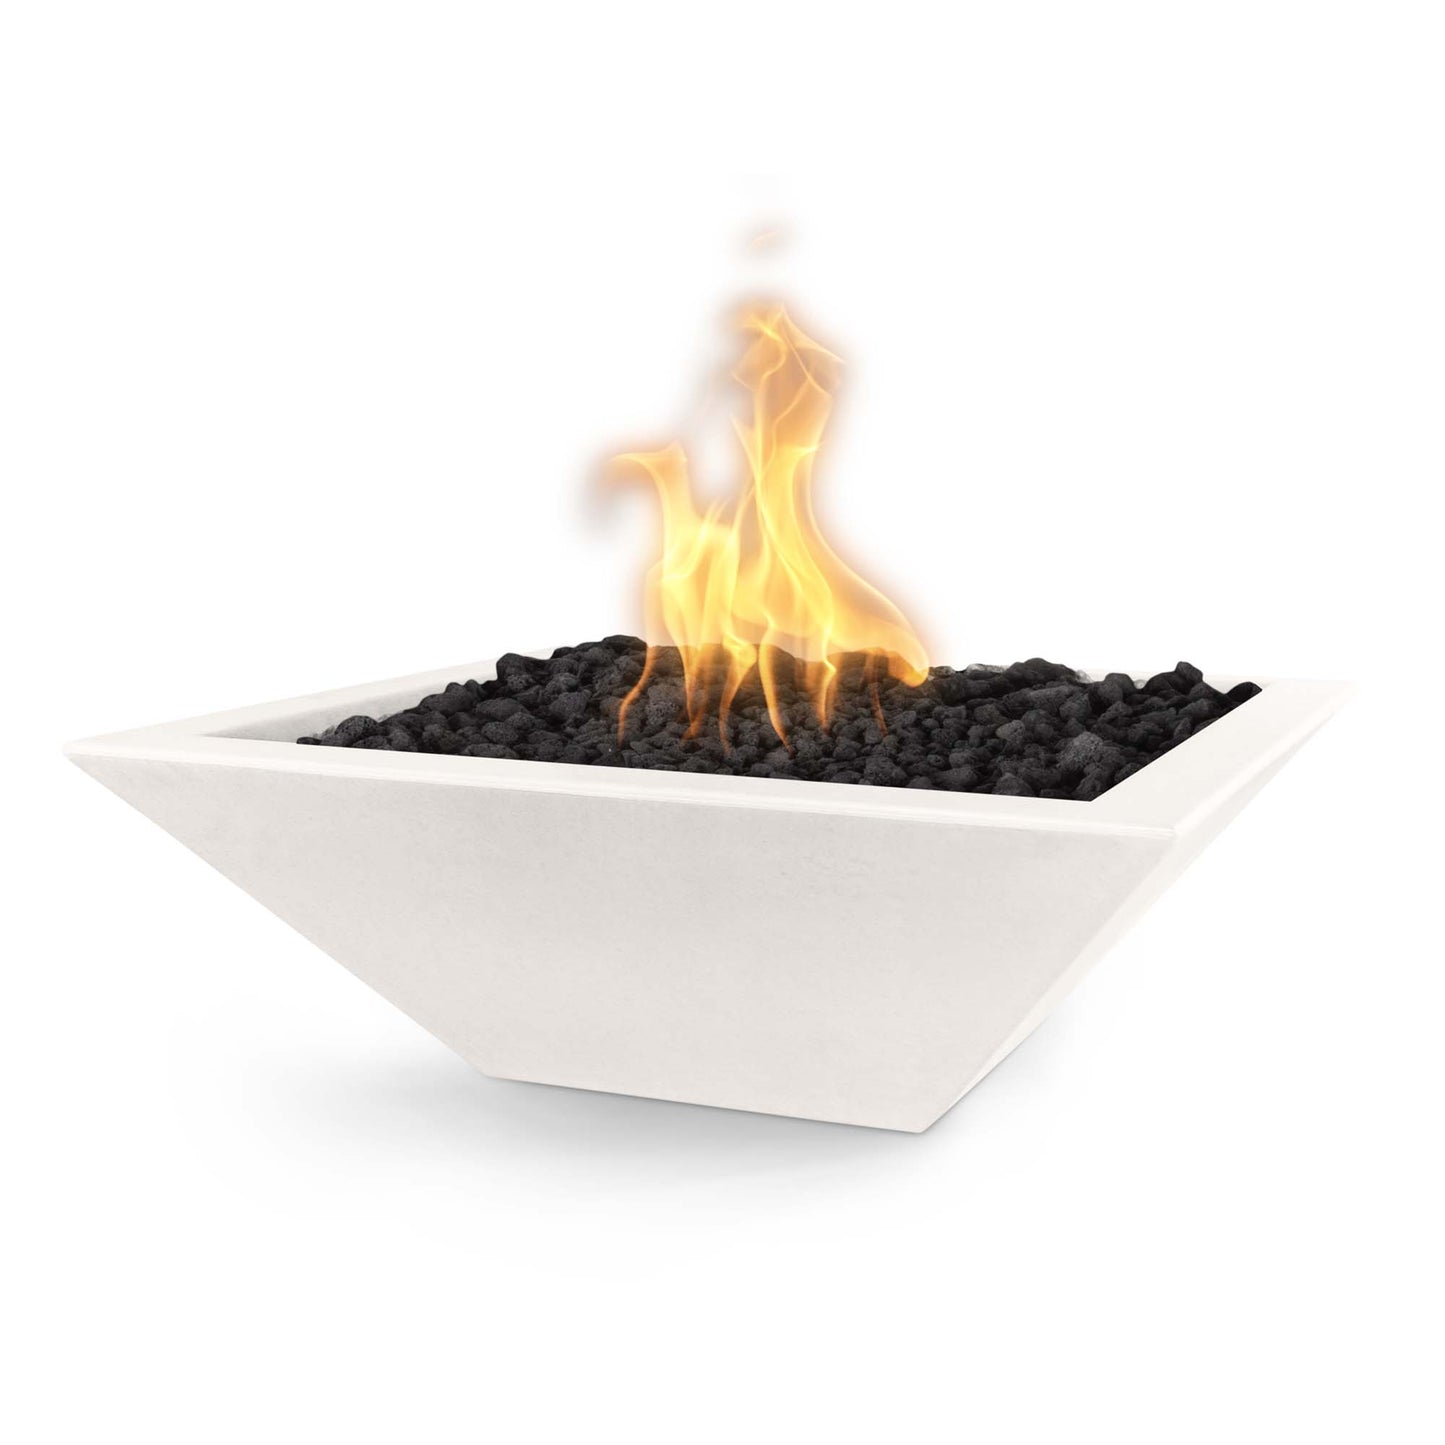 The Outdoor Plus Square Maya 30" Natural Gray GFRC Concrete Natural Gas Fire Bowl with Match Lit with Flame Sense Ignition